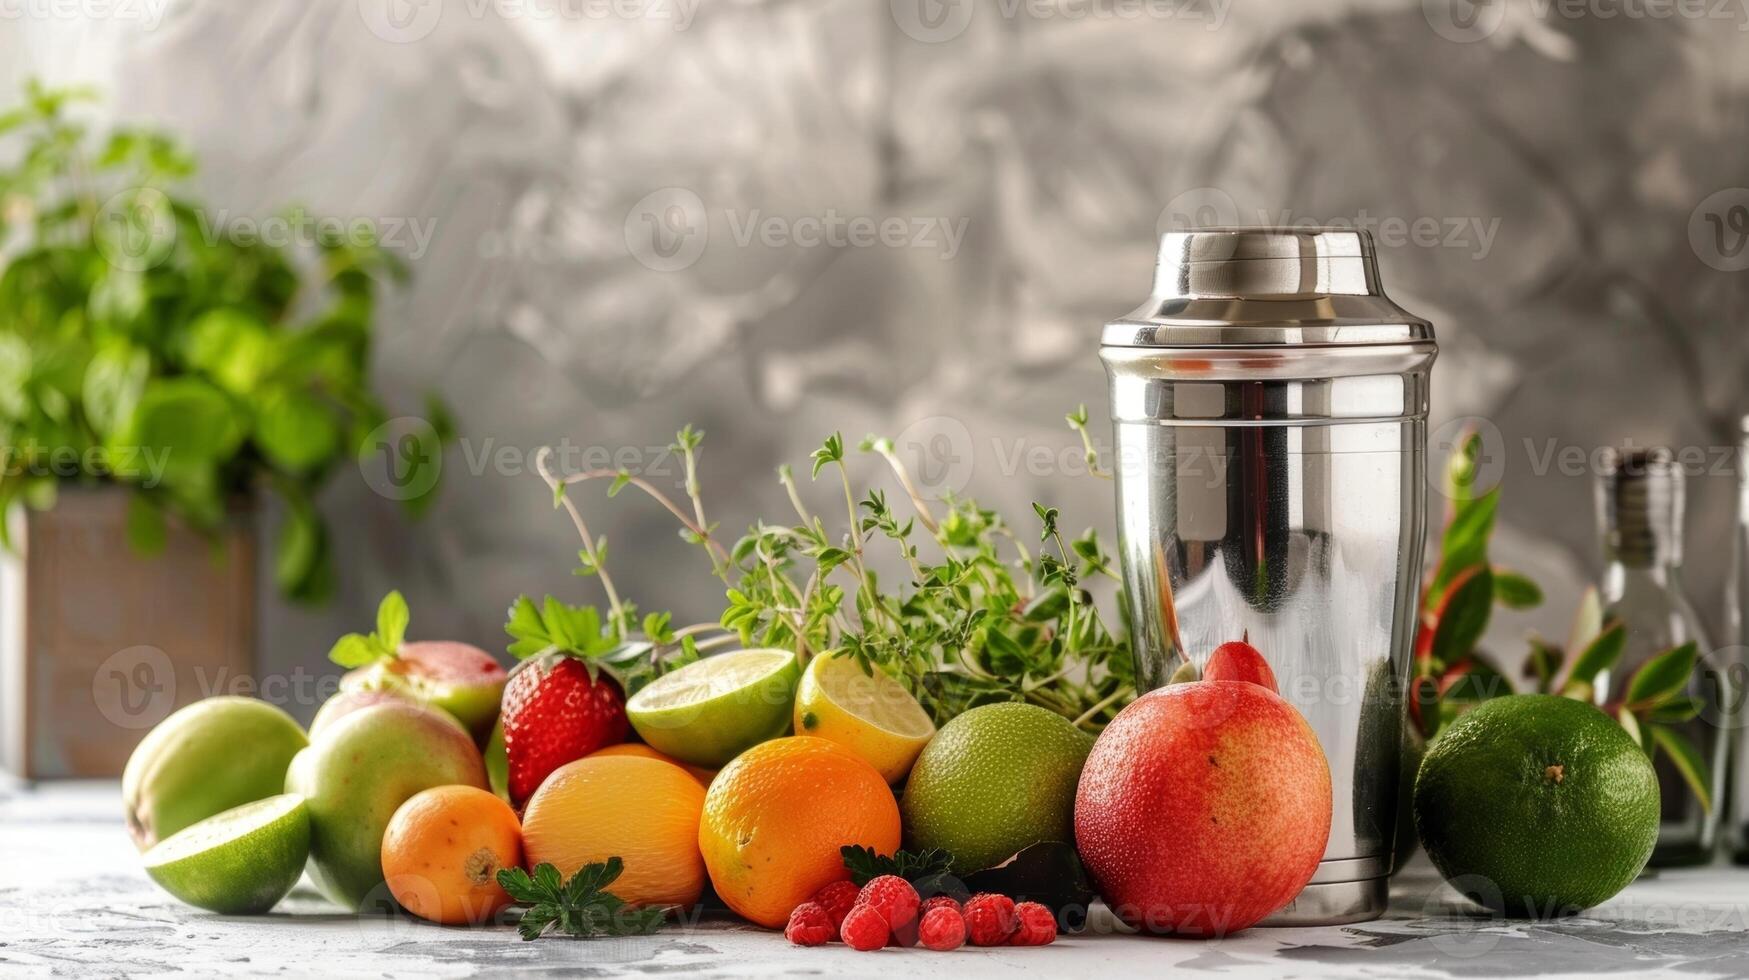 A stylish mocktail shaker sits next to a variety of fresh fruits and herbs ready to be used in the creation of innovative alcoholfree drinks photo